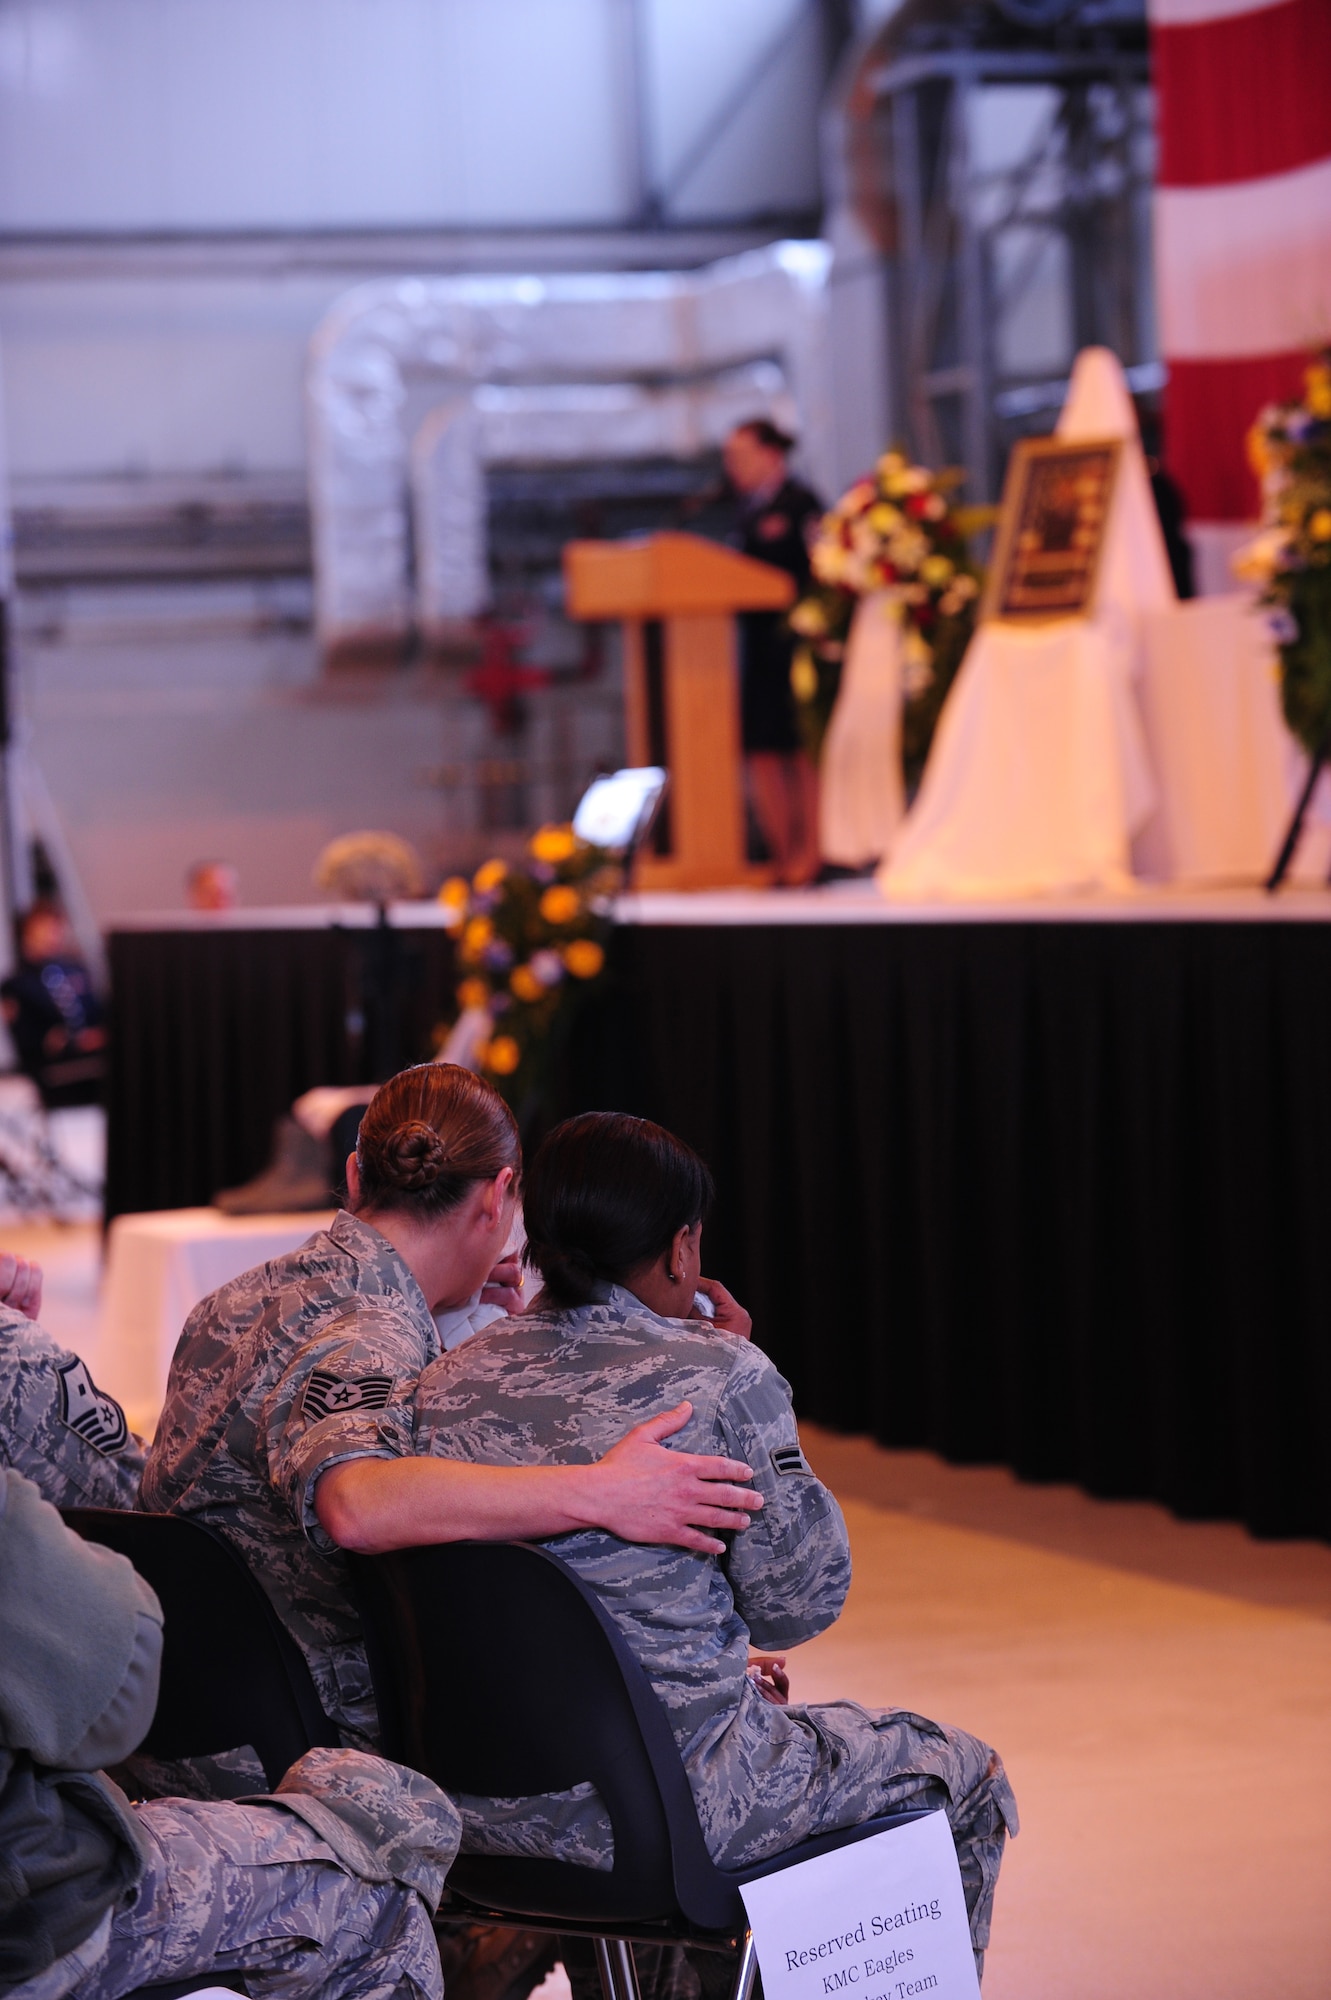 Airmen mourn during a memorial ceremony for Airman 1st Class Zachary Cuddeback, 86th Vehicle Readiness Squadron, Ramstein Air Base, Germany, March 10, 2011. Airman Cuddeback was killed in action at Frankfurt International Airport March 2, 2011. (U.S. Air Force photo by Senior Airman Brittany Perry)